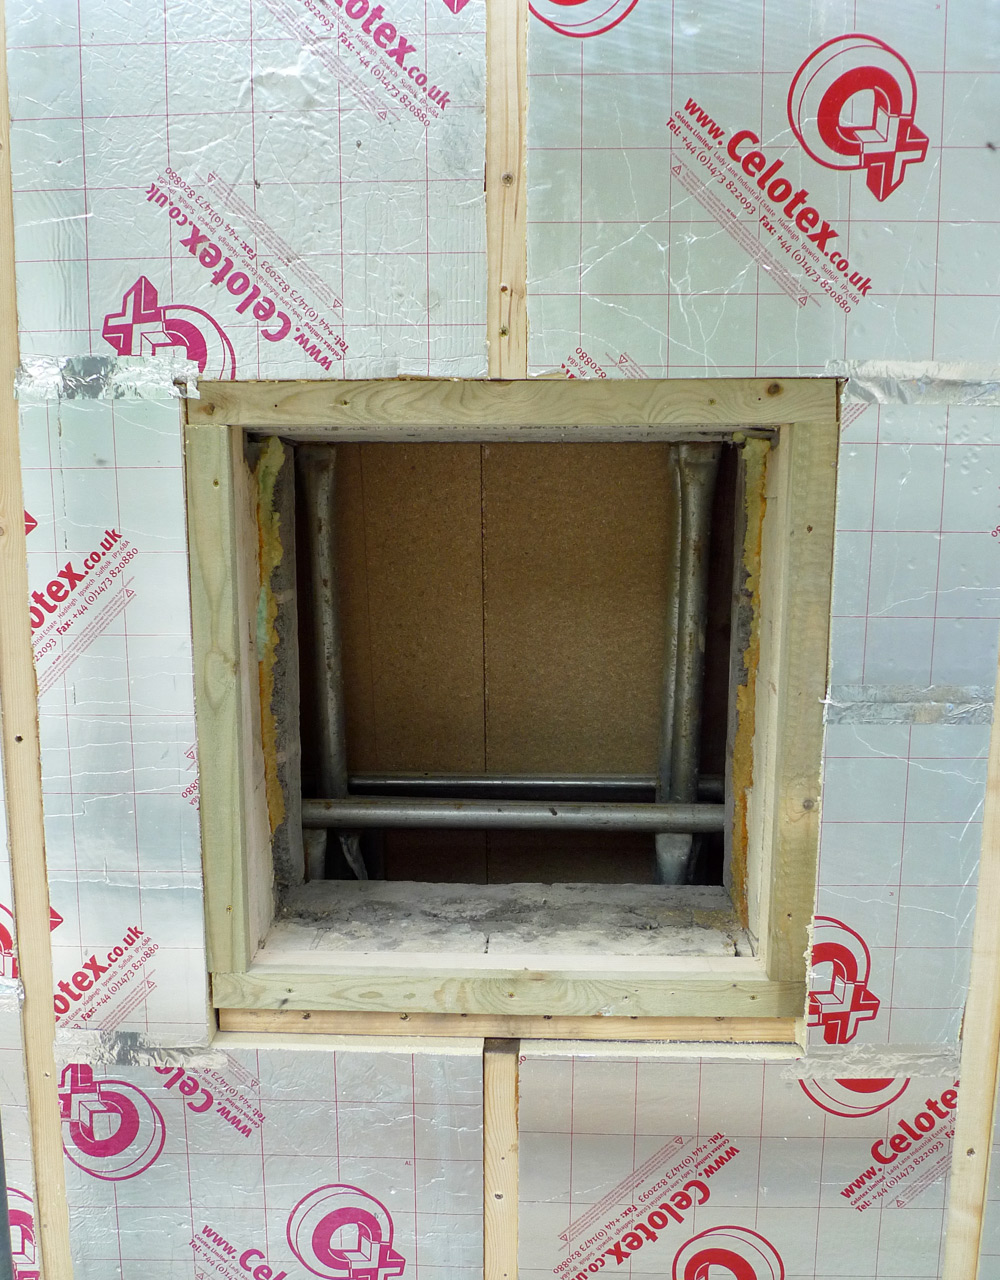 Rebuild - Celotex and timber frame around window opening in masonry wall